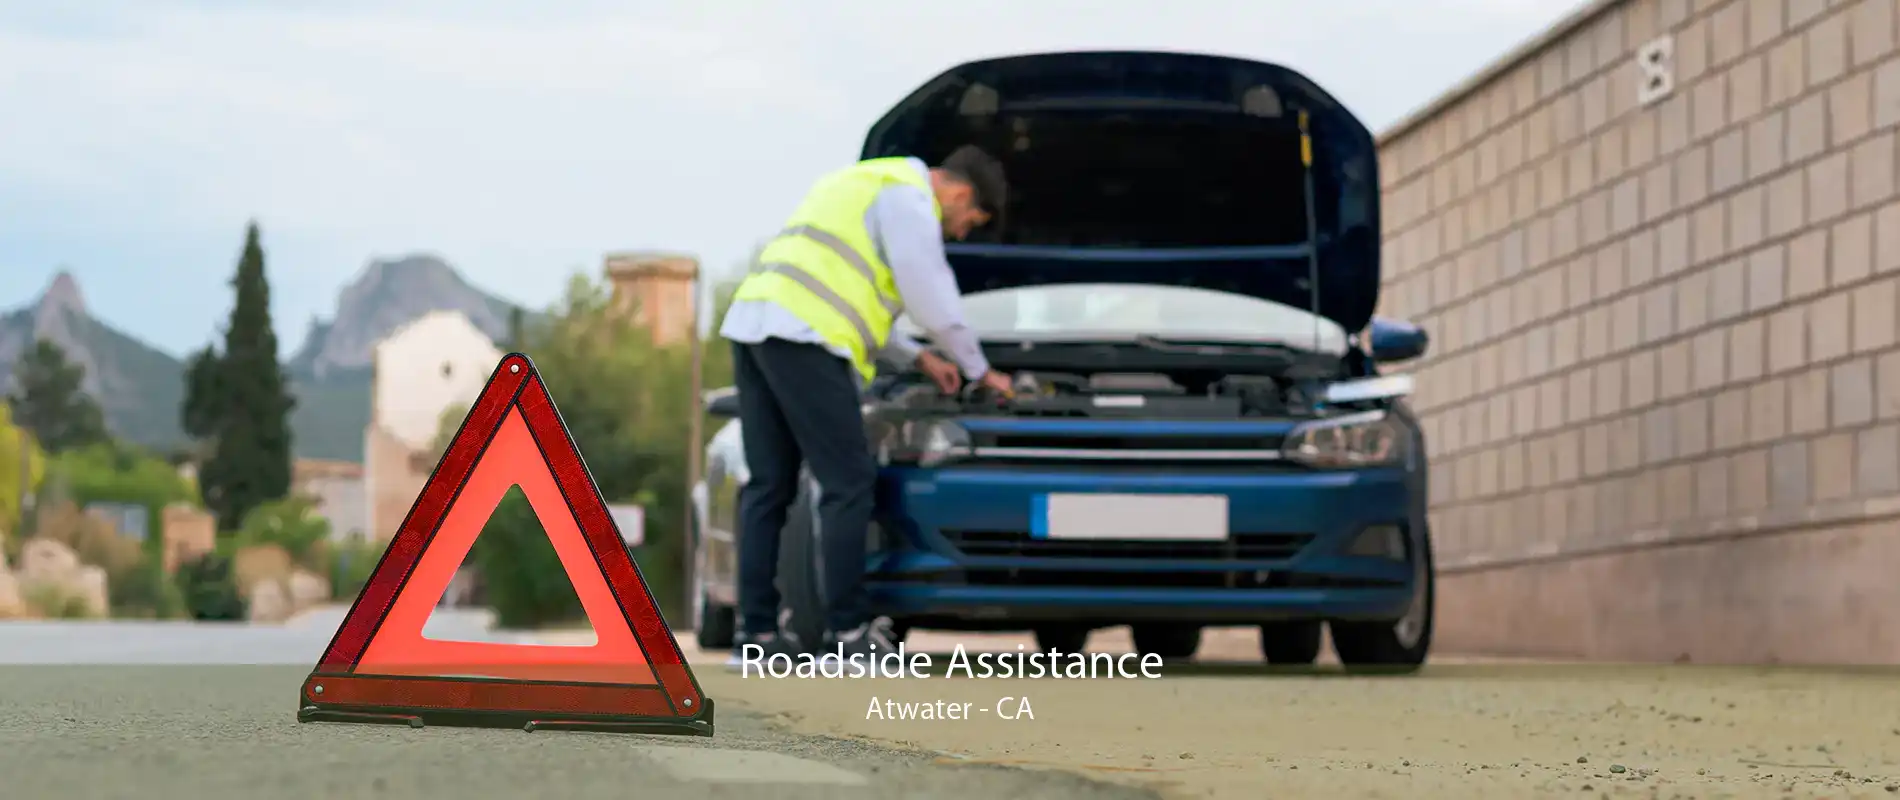 Roadside Assistance Atwater - CA